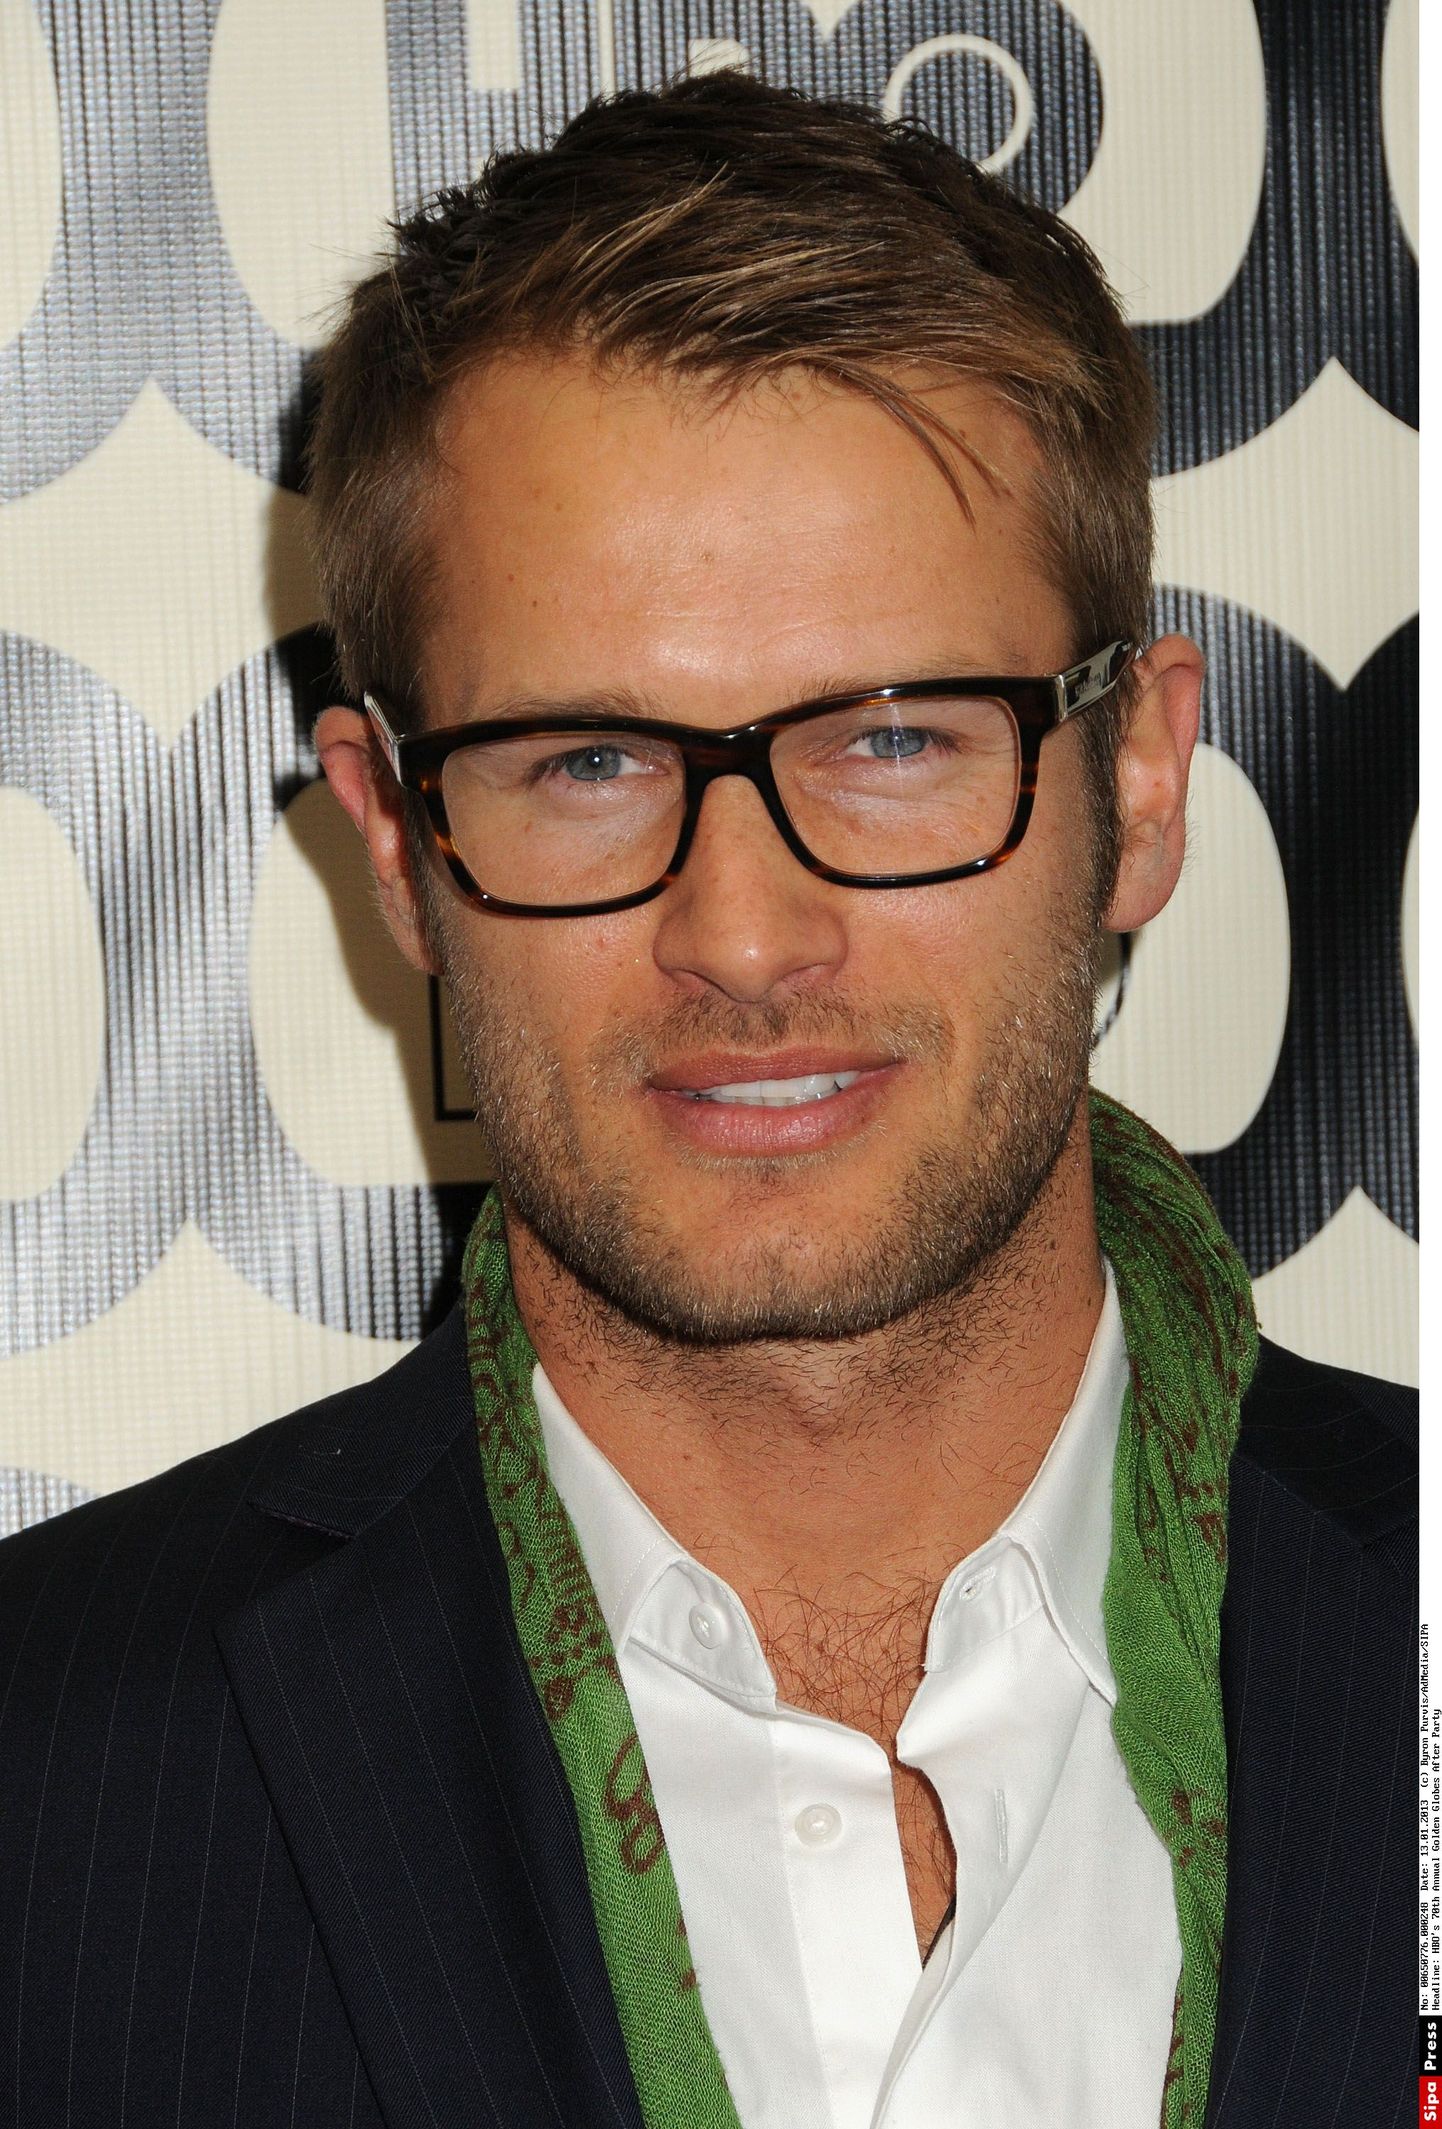 13 January 2013 - Beverly Hills, California - Johann Urb. HBO's 70th Annual Golden Globes After Party held at Circa 55 Restaurant. Photo Credit: Byron Purvis/AdMedia/ADMEDIA_adm_HBO2013GGParty_BP_252/Credit:Byron Purvis/AdMedia/SIPA/1301141413